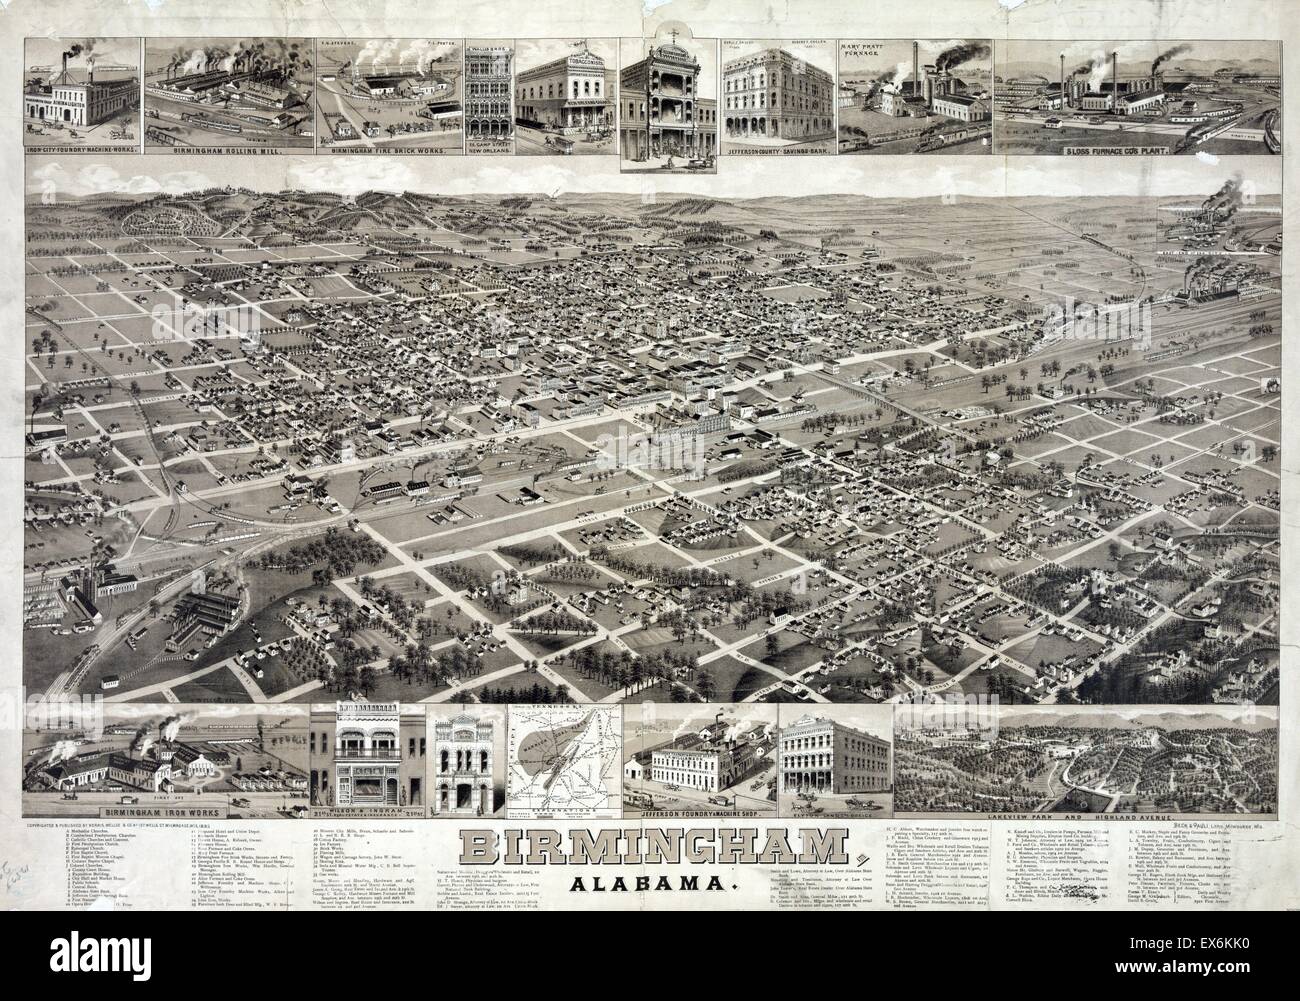 A composite of bird's-eye view of Birmingham, Alabama with a view Lakeview Park and Highland Avenue including. Dated 1885 Stock Photo